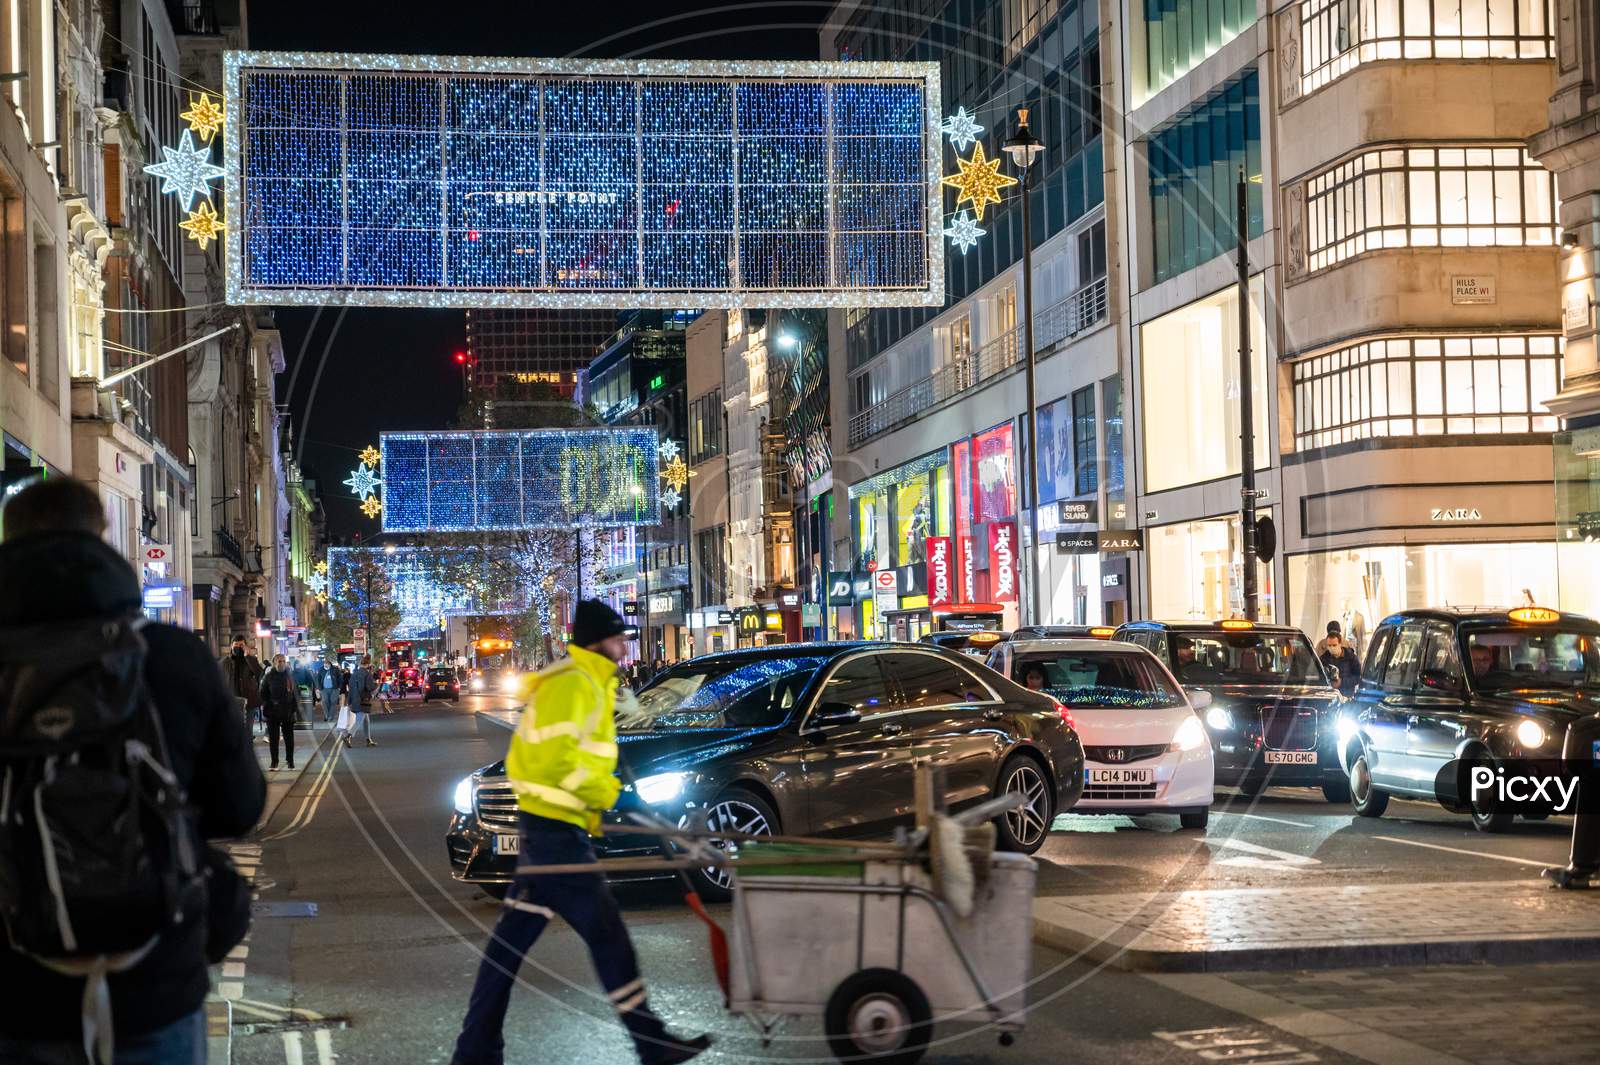 A Street Cleaner Pushes A Cart Between Traffic Beneath The Oxford Street Christmas Decorations At Night